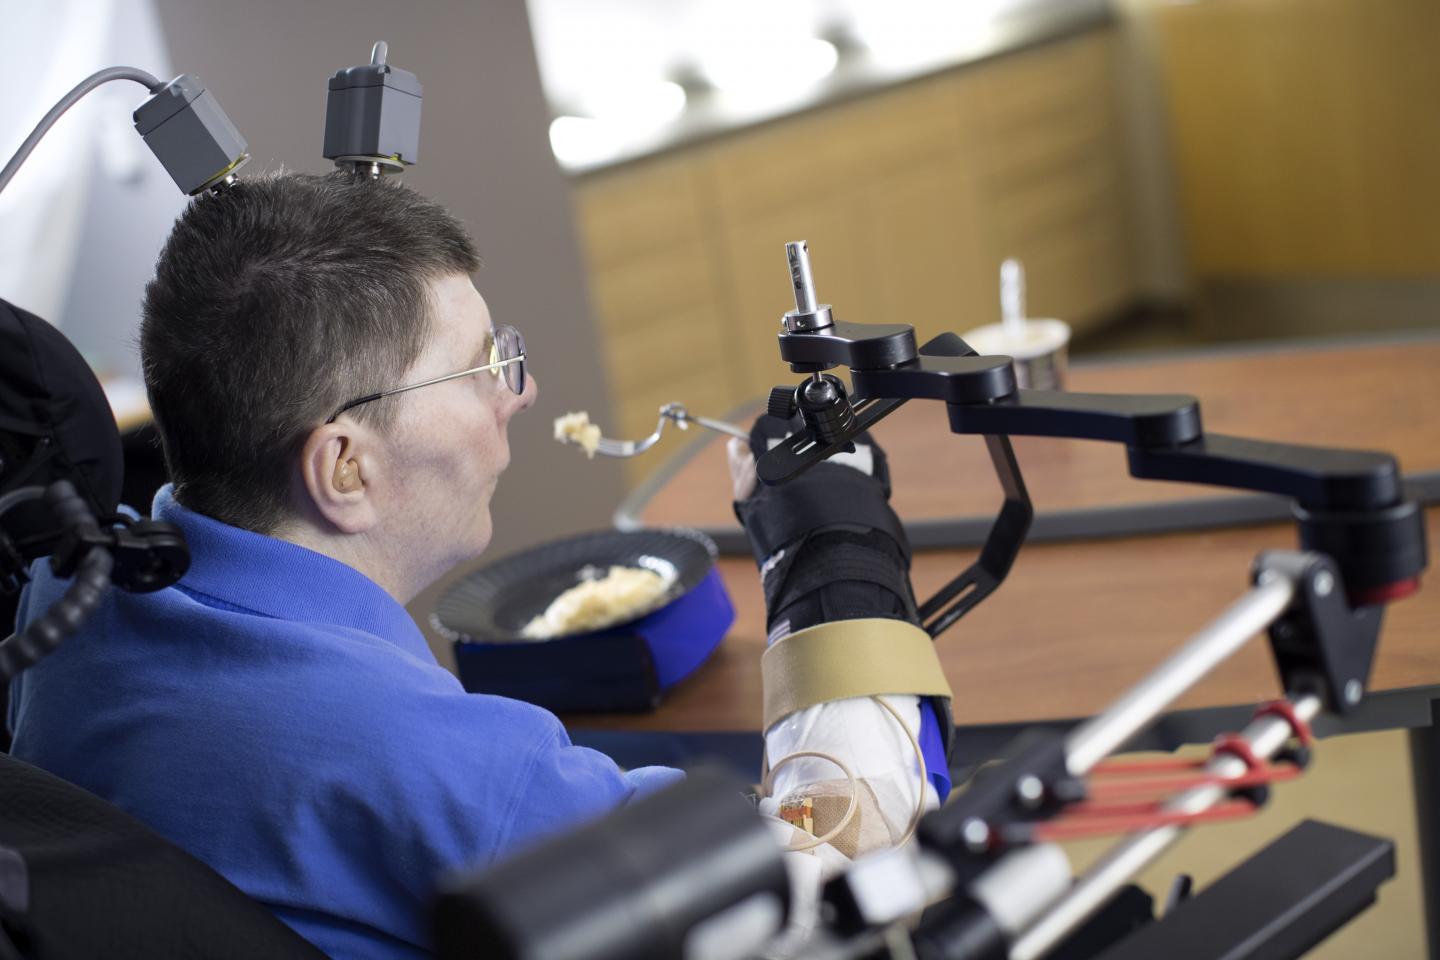 Man with Quadriplegia Employs Injury Bridging Technologies to Move Again -- Just by Thinking